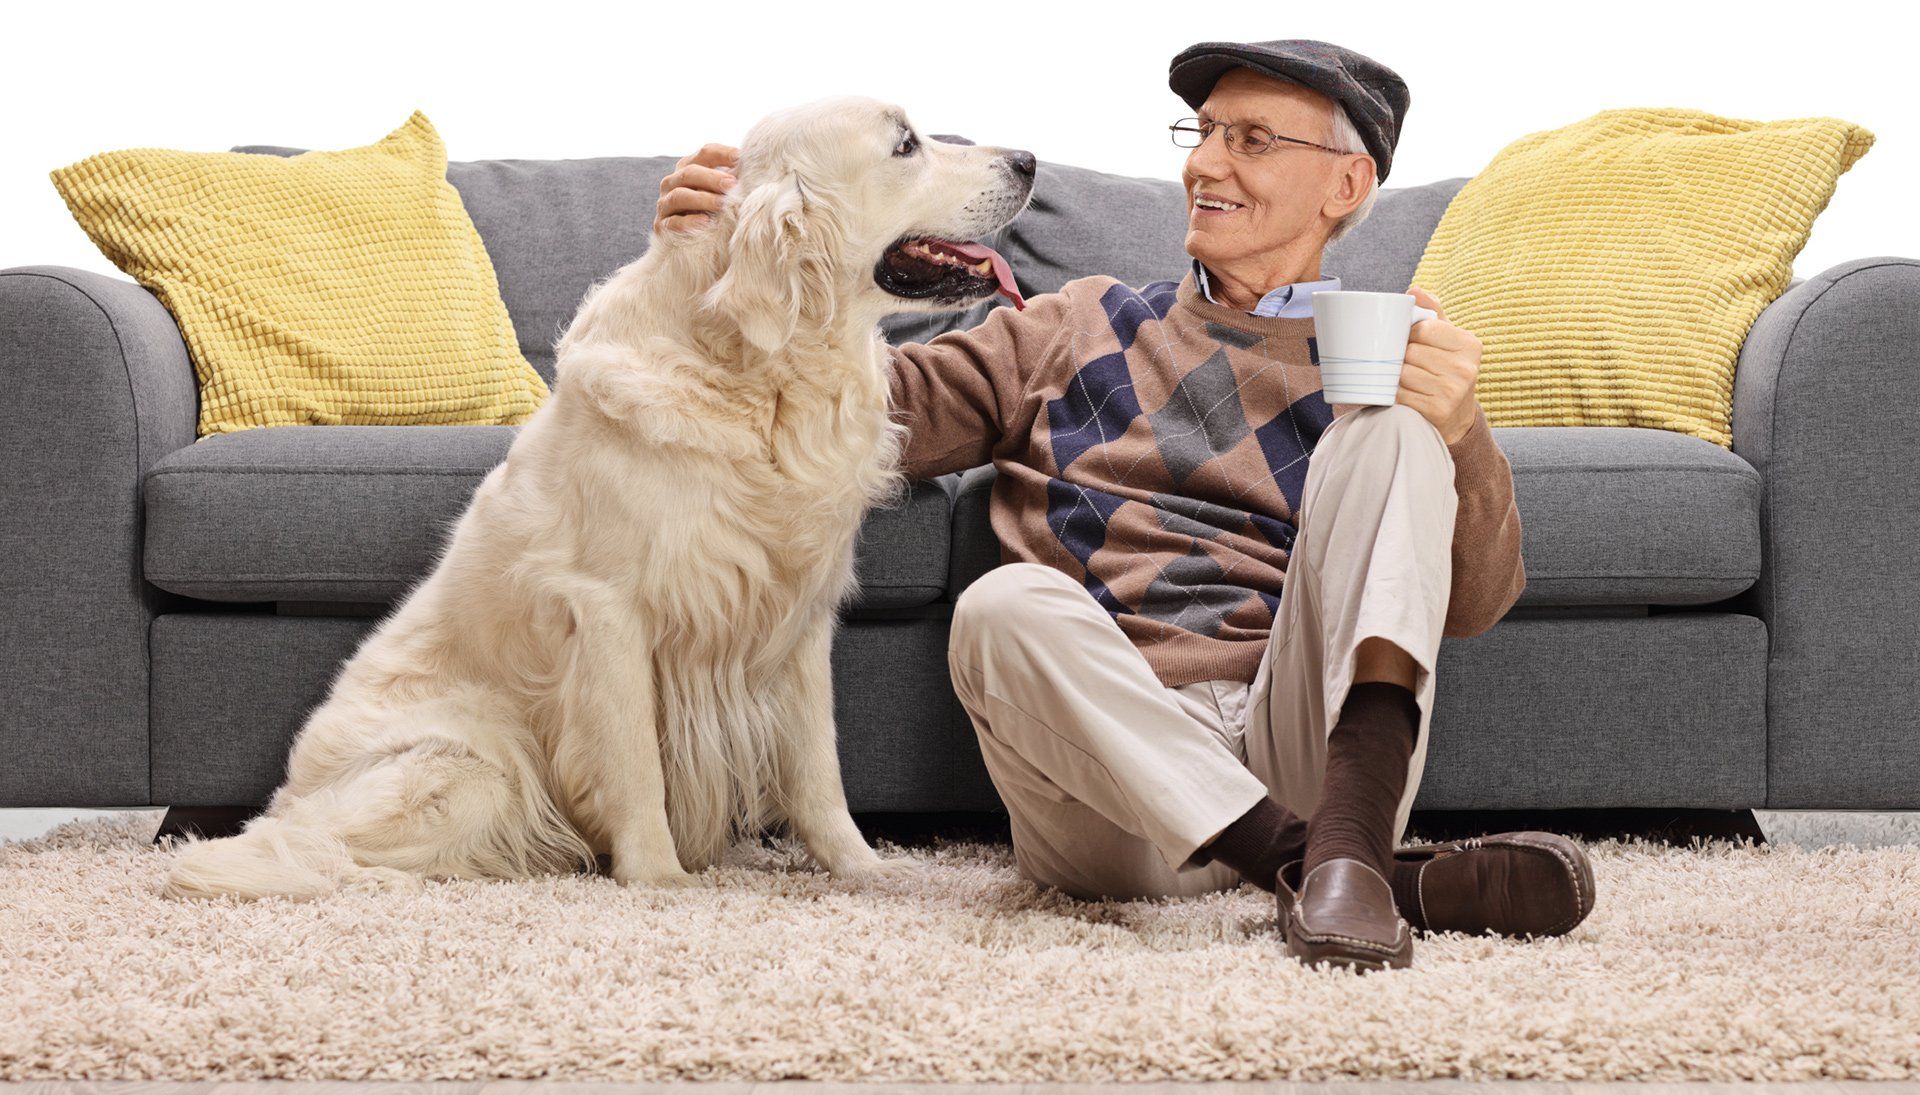 Pet Stain — Man And His Dog Sitting On Carpet in Richmond, VA